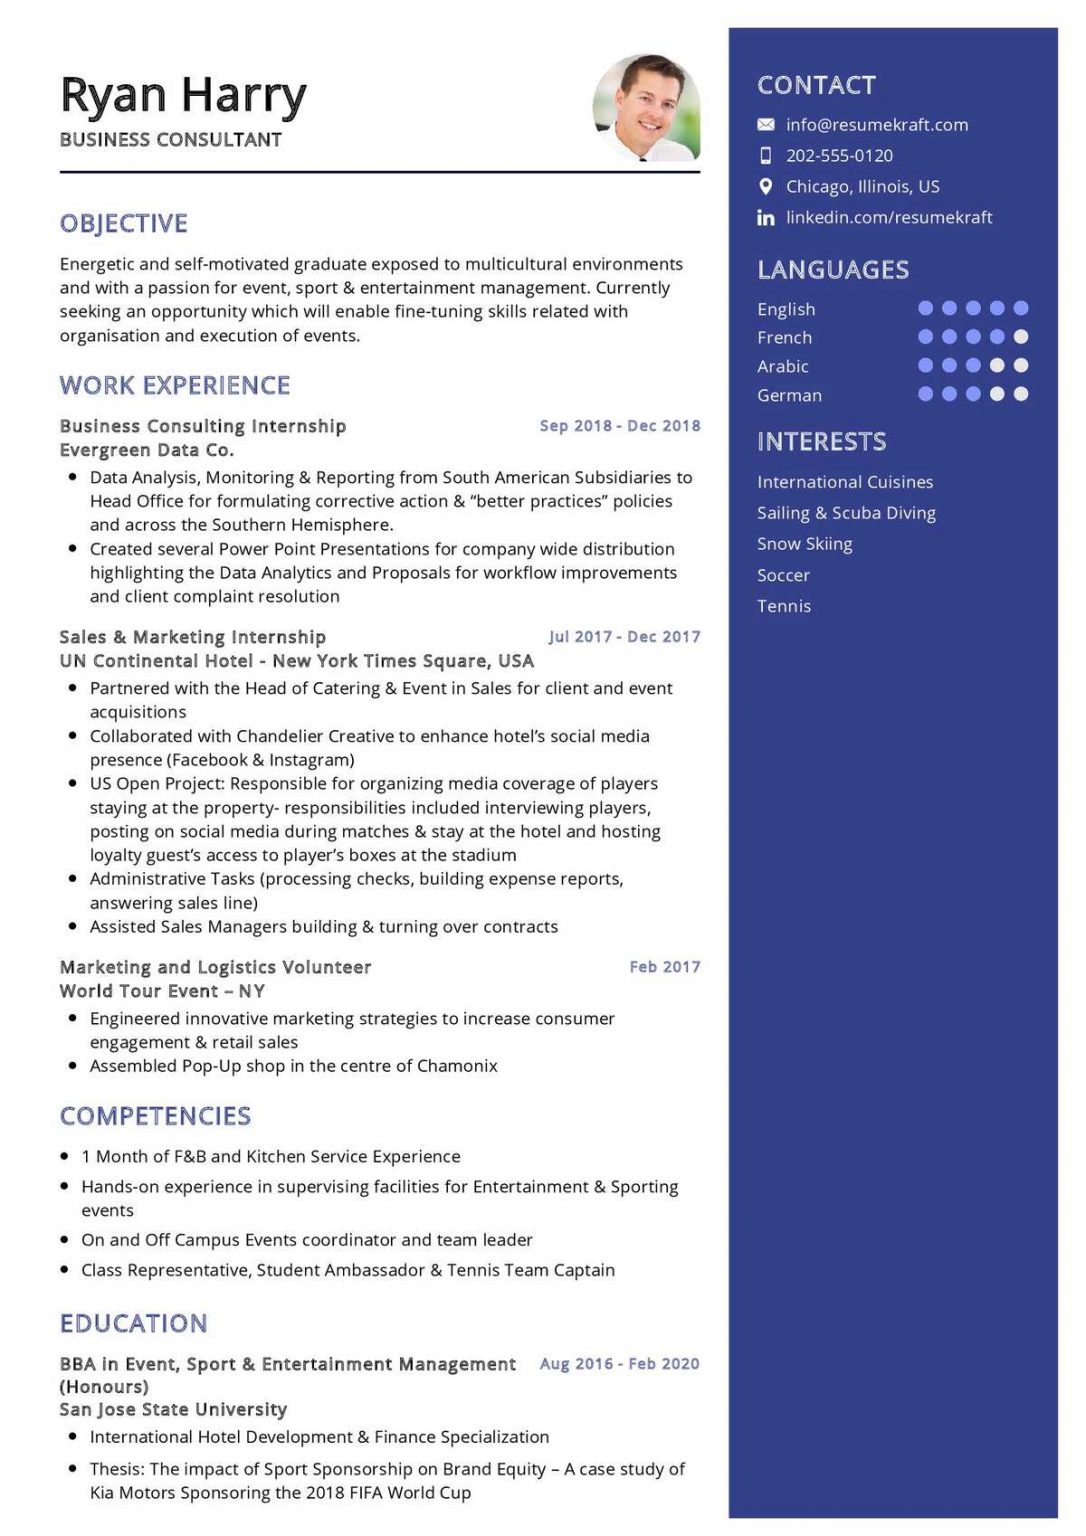 my cv consultant professional resume writers sydney chippendale nsw